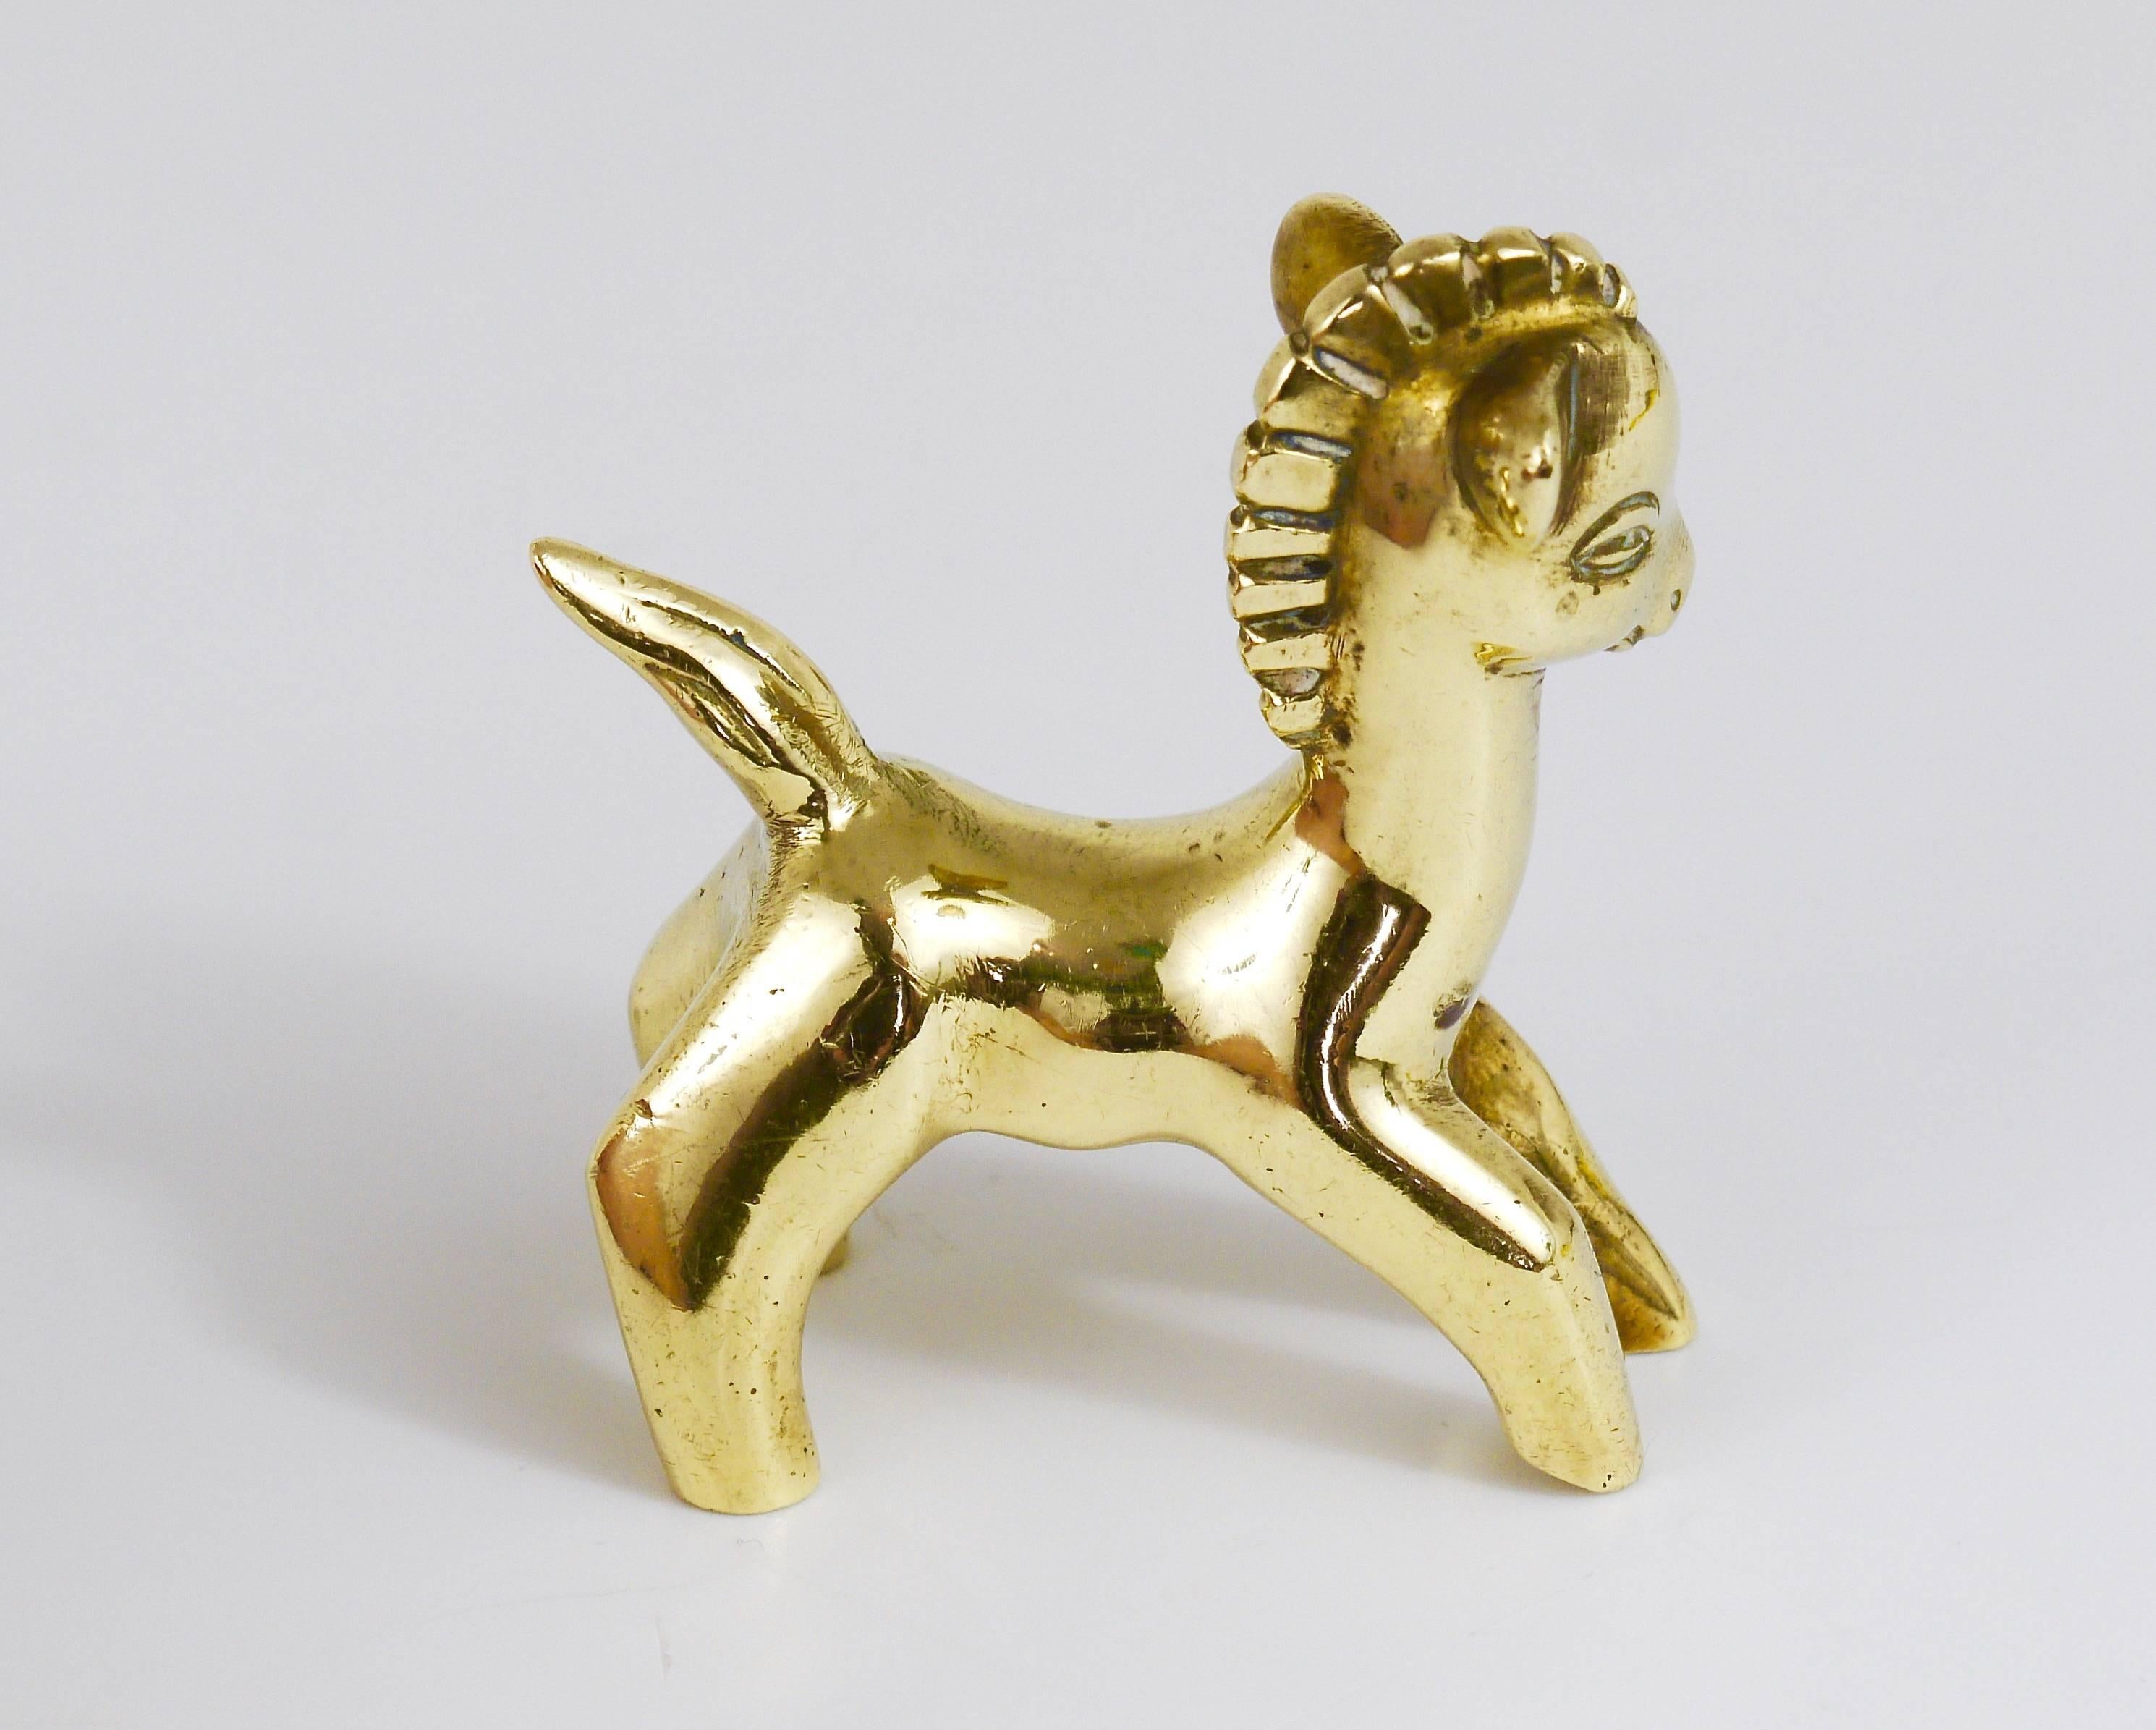 A lovely horse foal sculpture made of brass from the 1950s. Designed by Walter Bosse, executed by Hertha Baller. In very good condition with charming patina. We offer more Walter Bosse brass objects in our other listings.